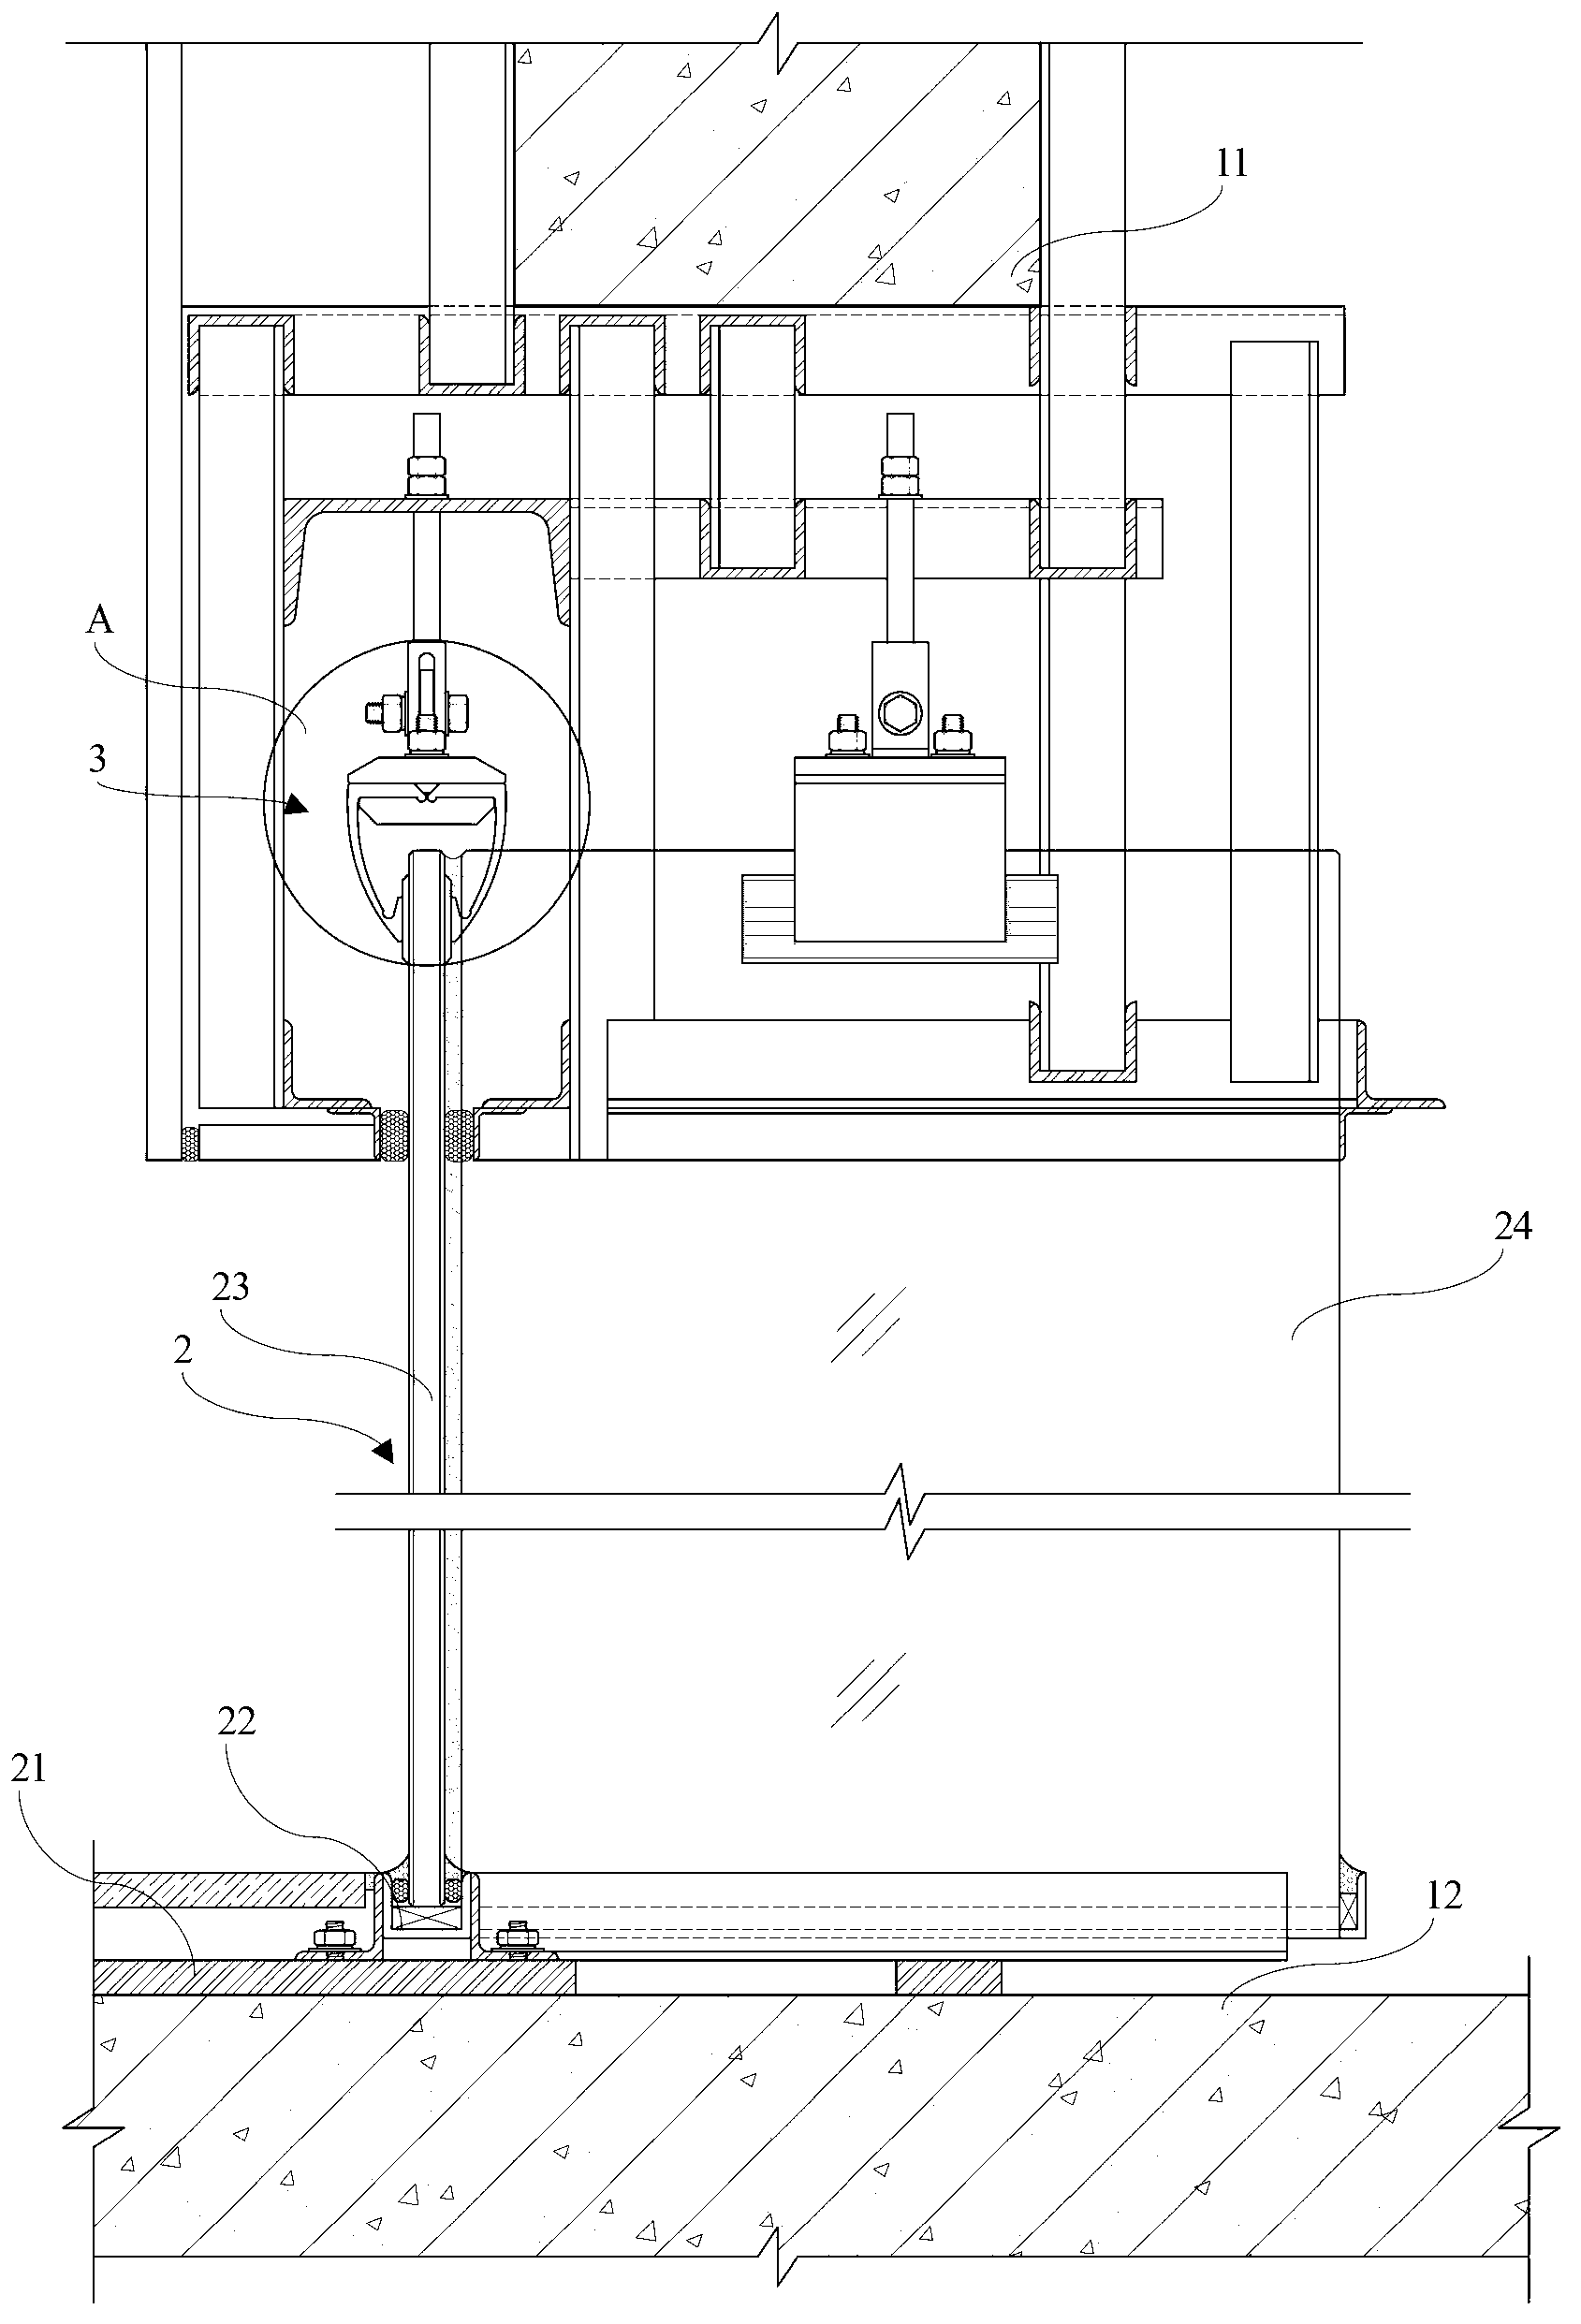 Hanging structure of glass curtain walls and method for installing glass curtain walls